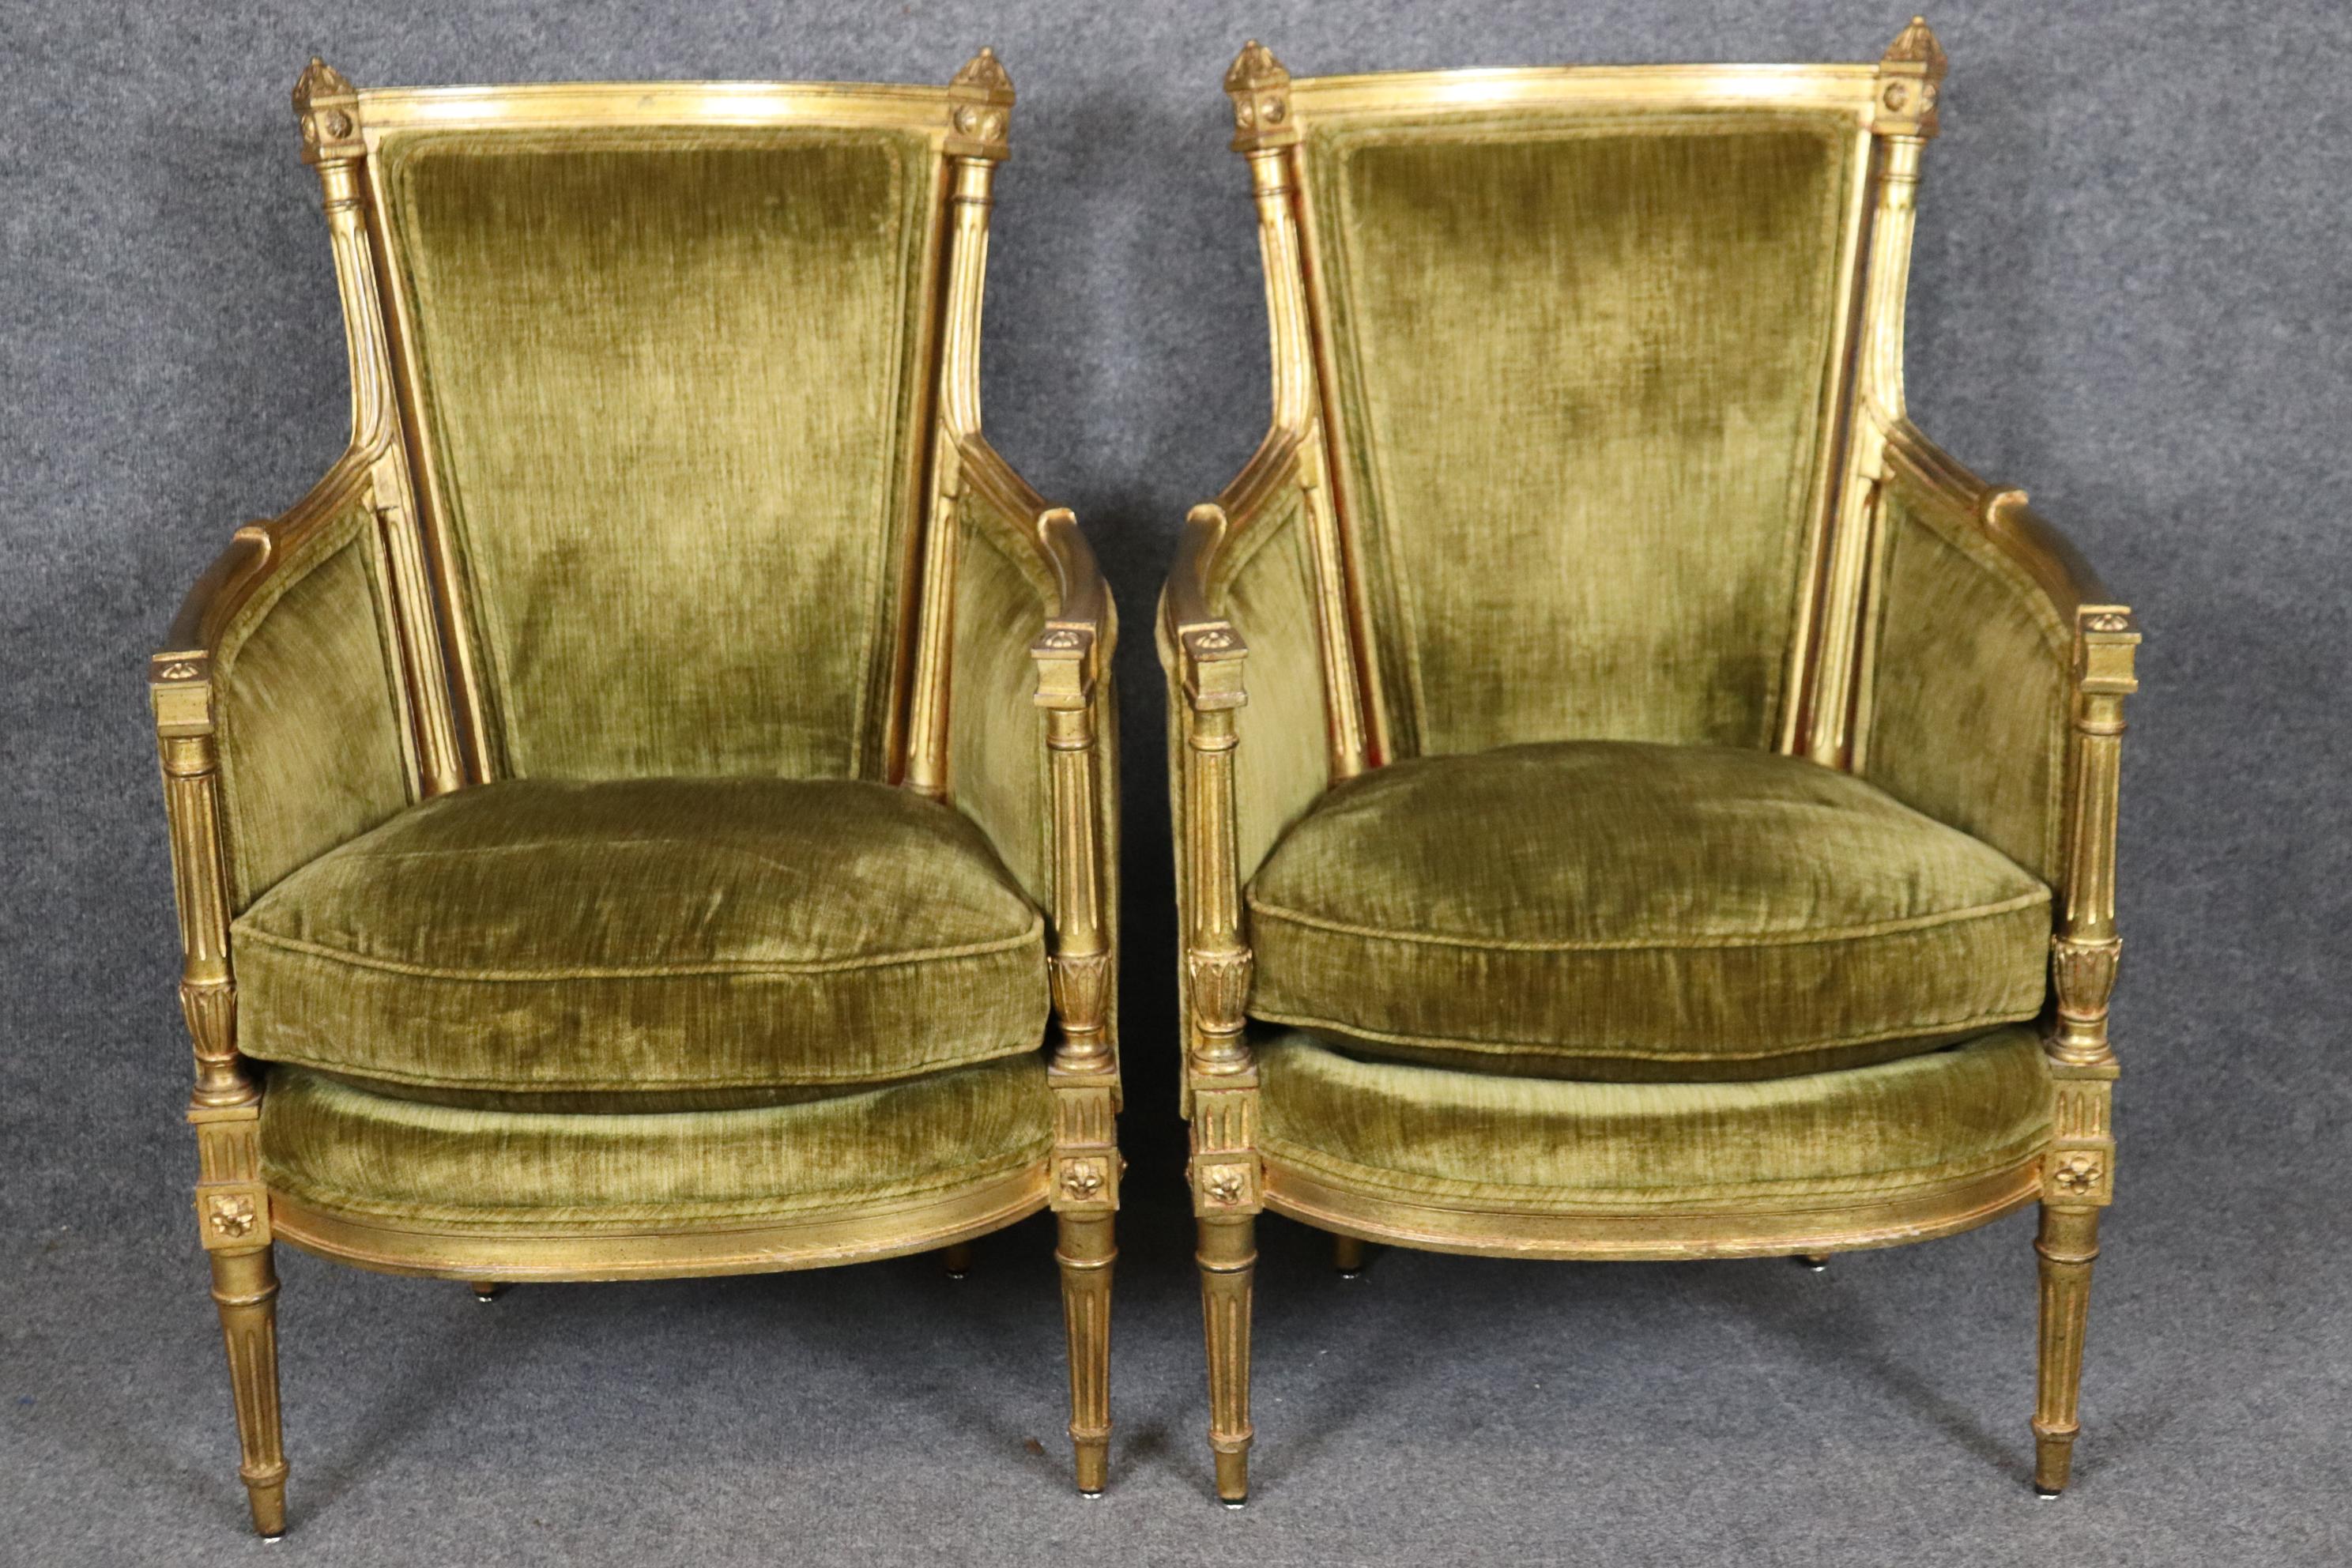 This is a beautiful pair of French-made gilded smaller scale bergere chairs. They have been reupholstered in Brooklyn NY and appear to be in good condition with regards to their upholstery and the frames are beautiful and luminous. Goose down